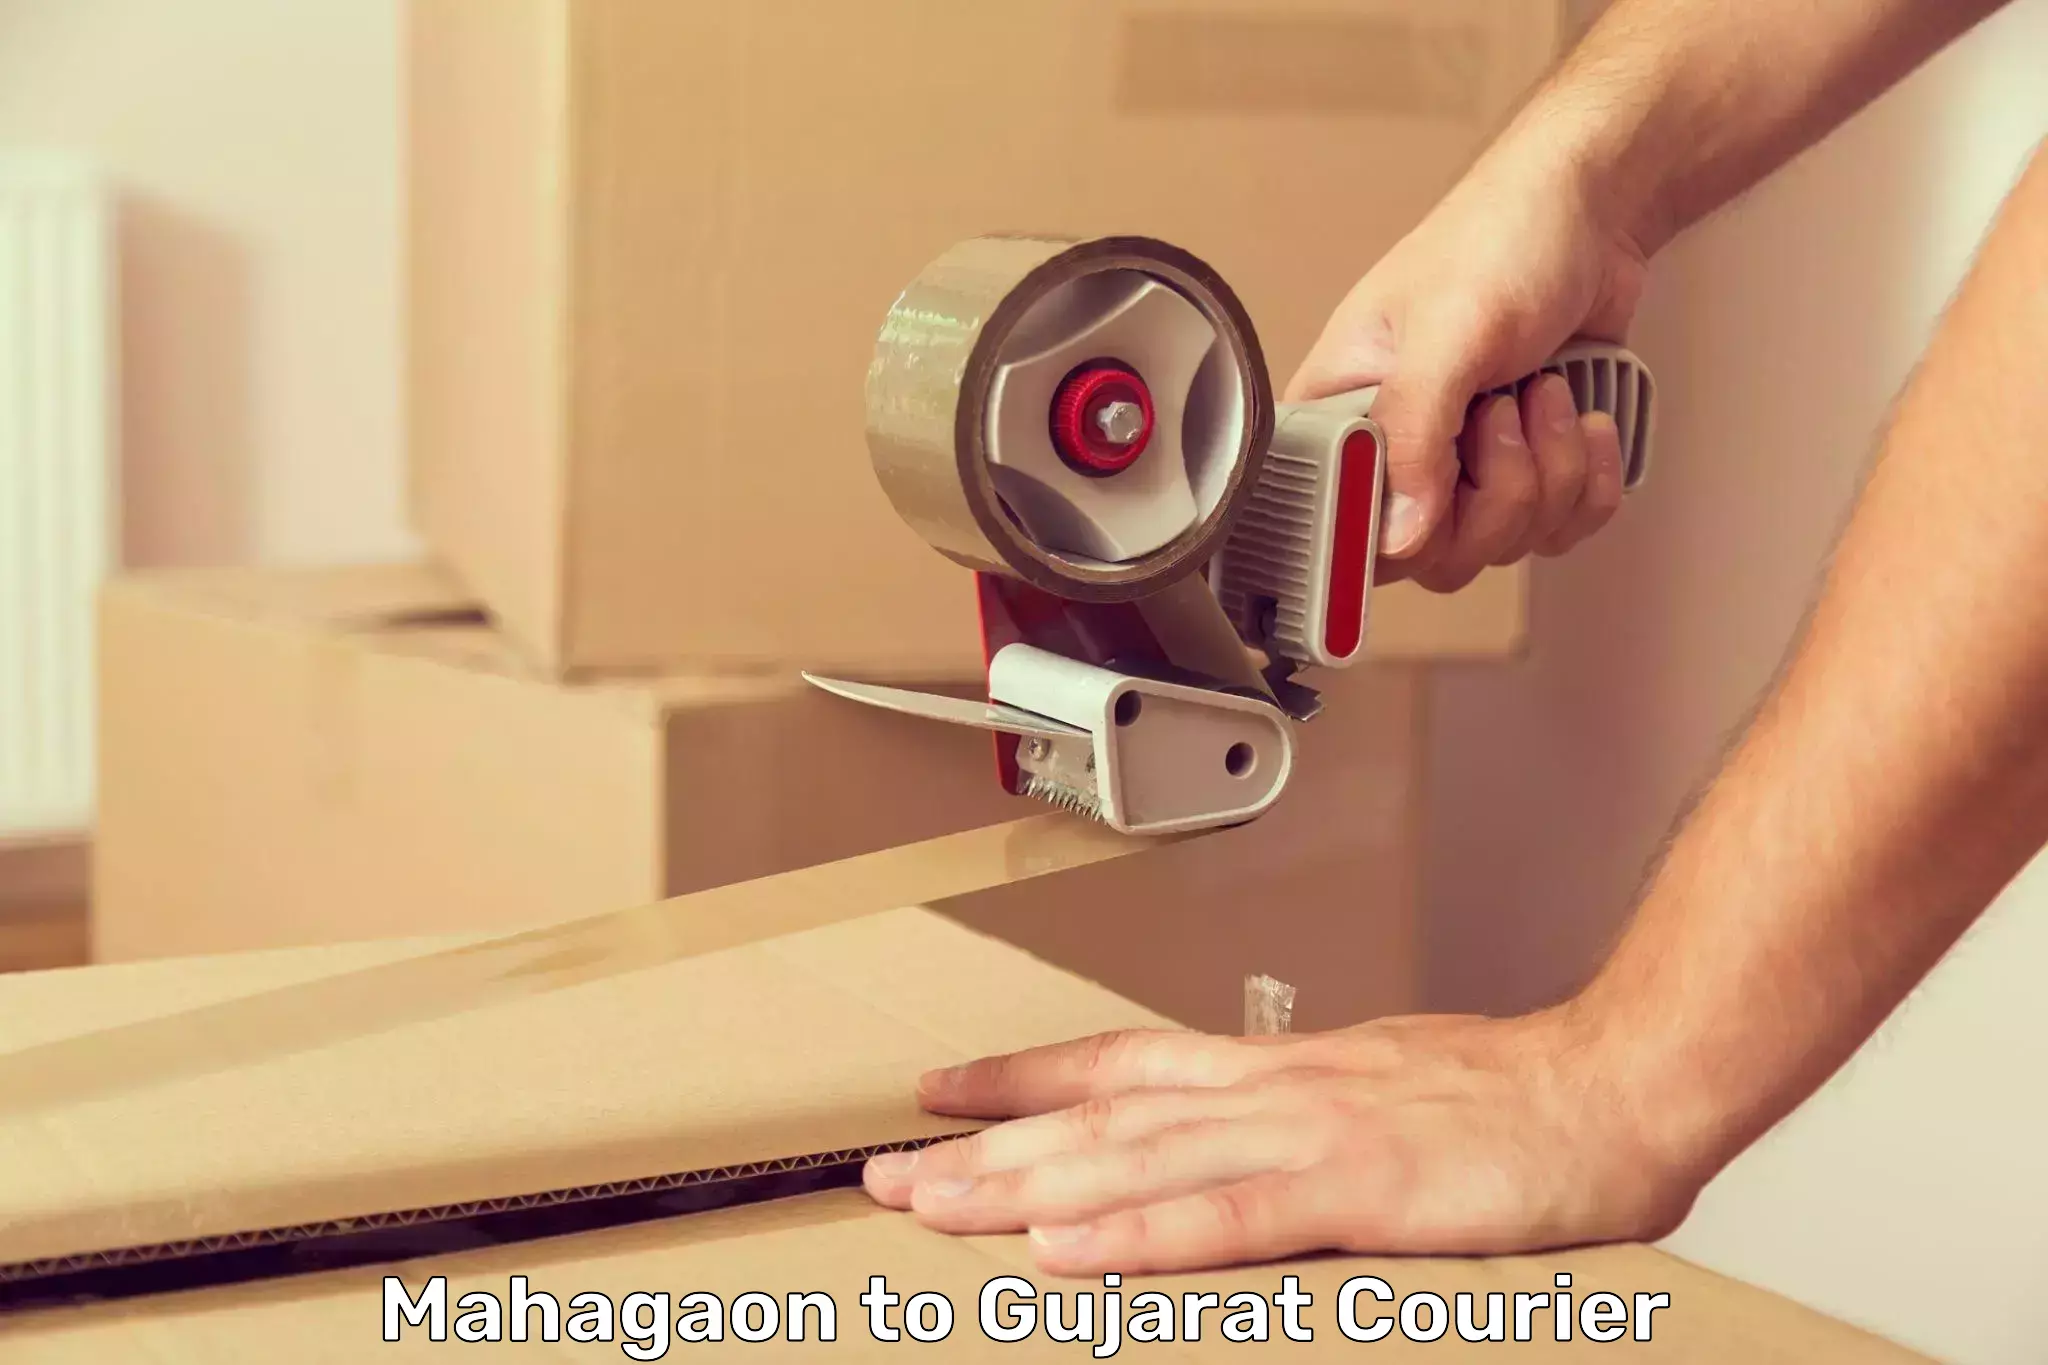 Global courier networks Mahagaon to Dholka